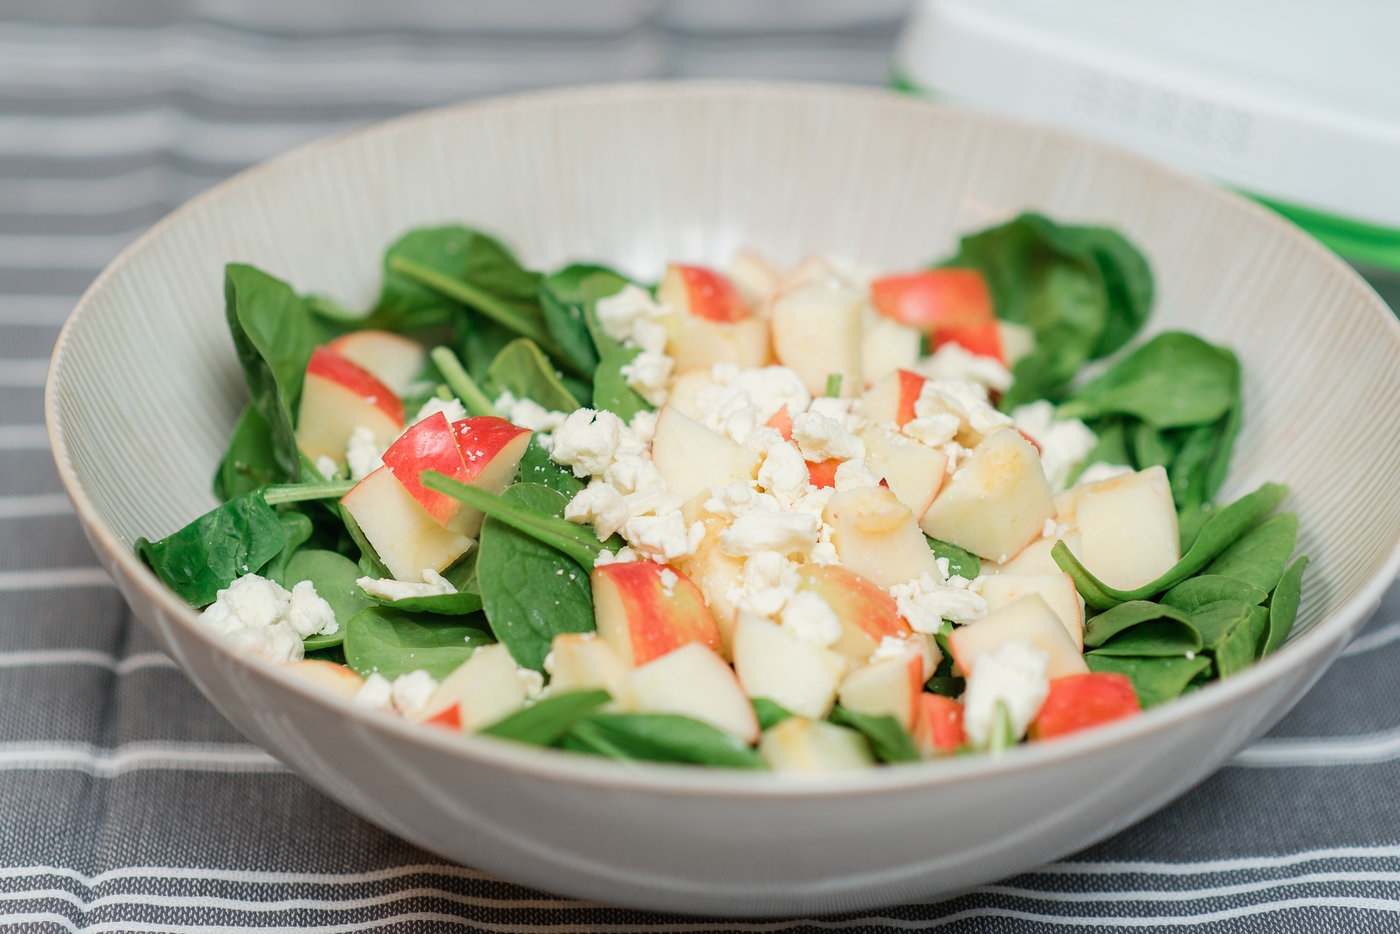 Green Apple And Spinach Salad by Alabama Health + Food blogger, Heather Brown // My Life Well Loved